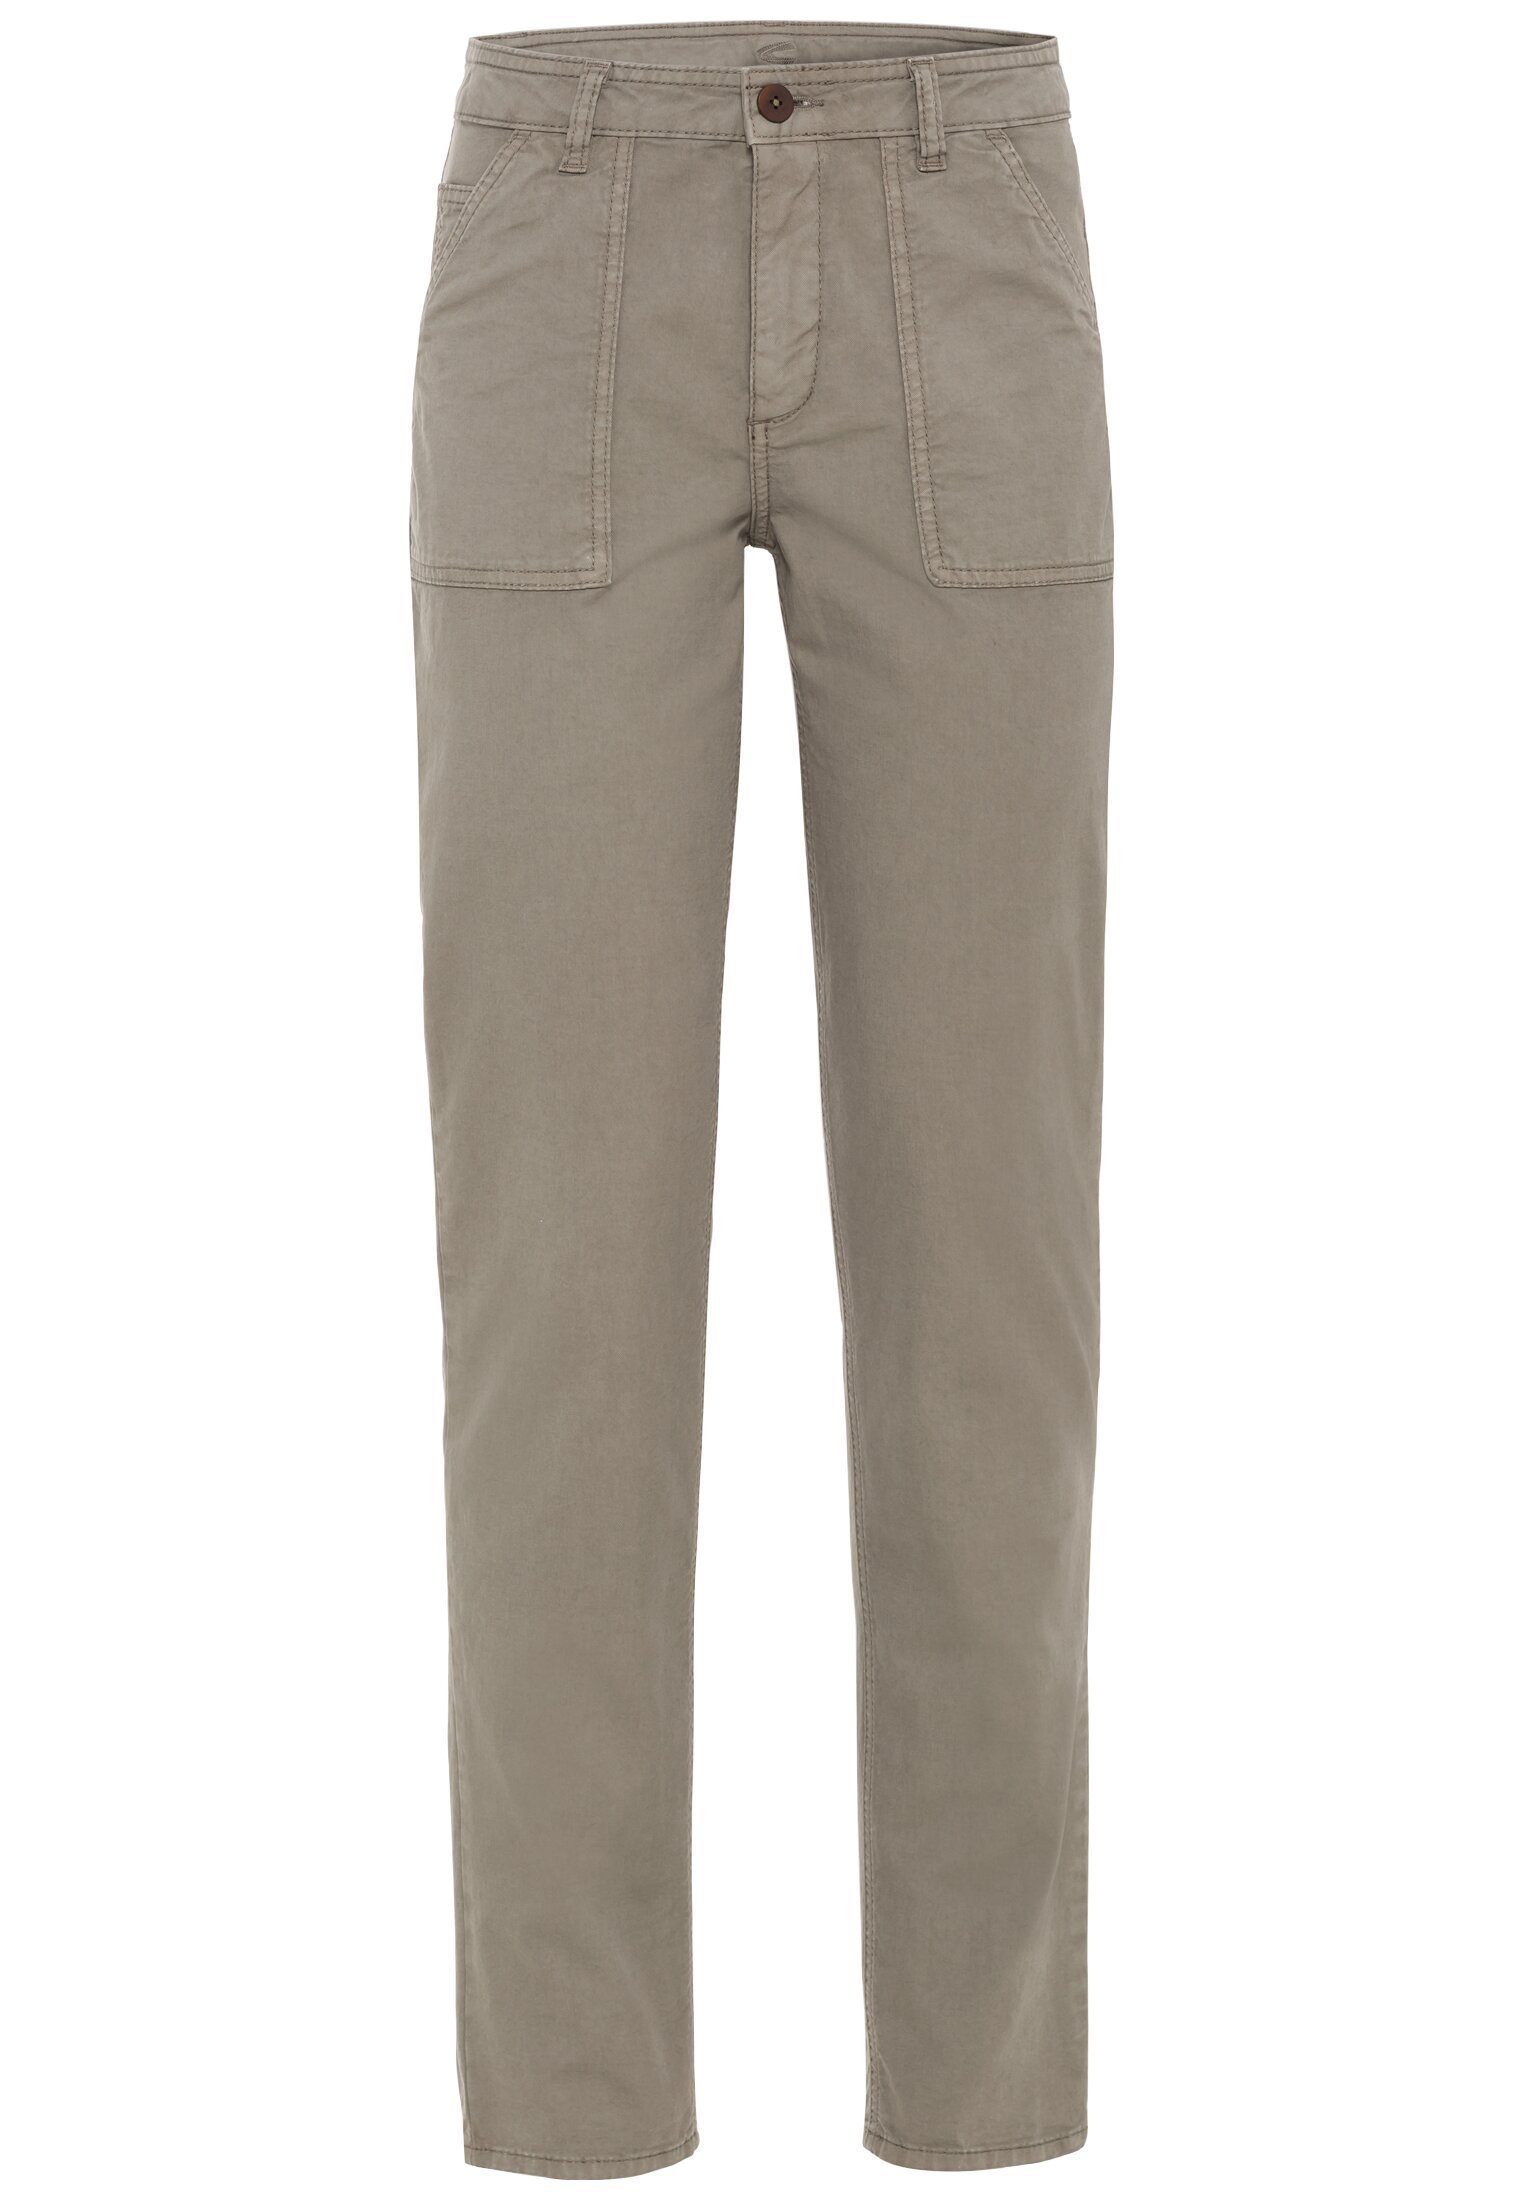 Fit un Active Chino camel active Straight in Chinohose Camel Damen Worker